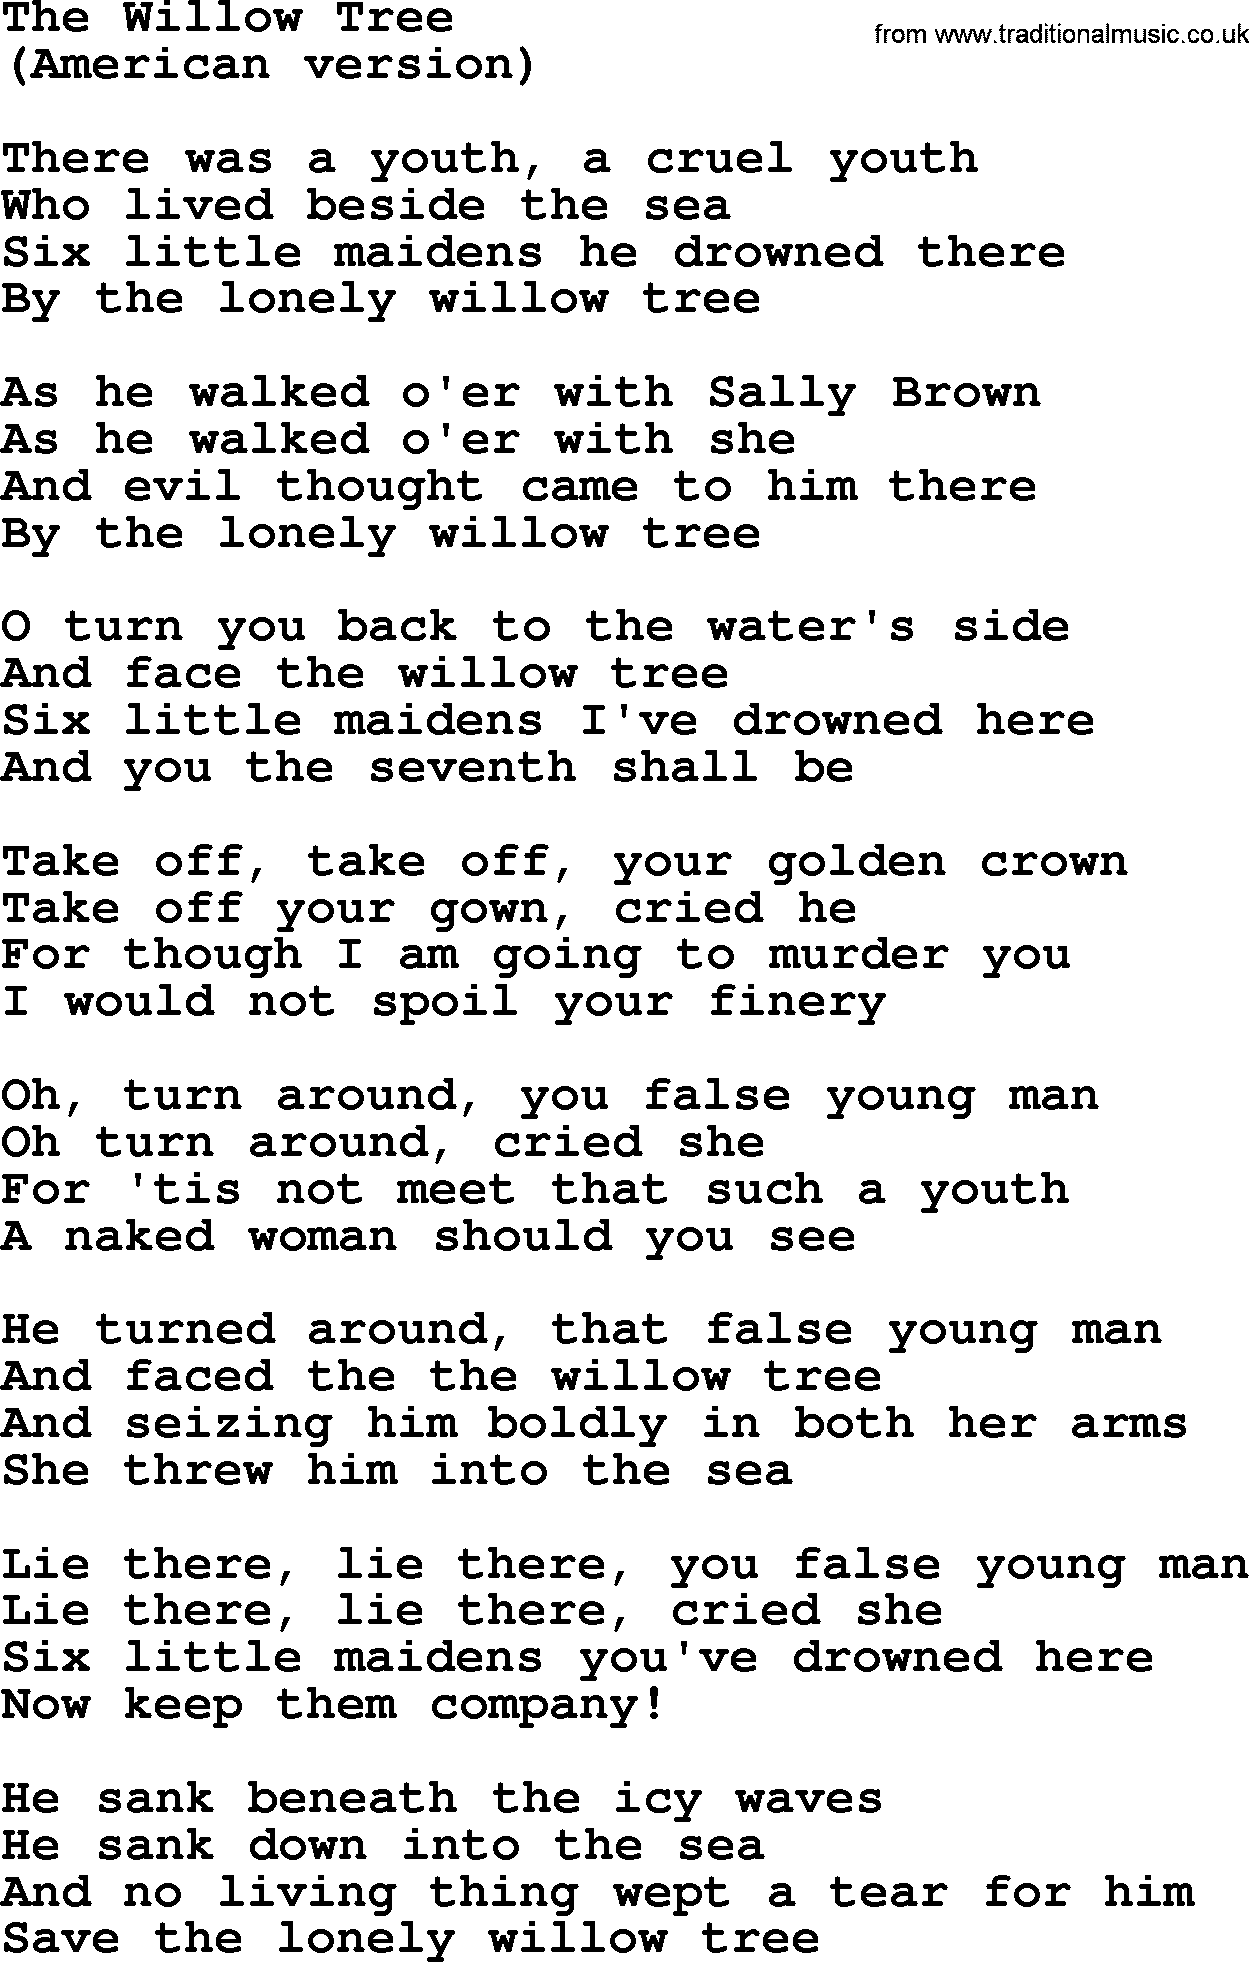 The Byrds song The Willow Tree, lyrics